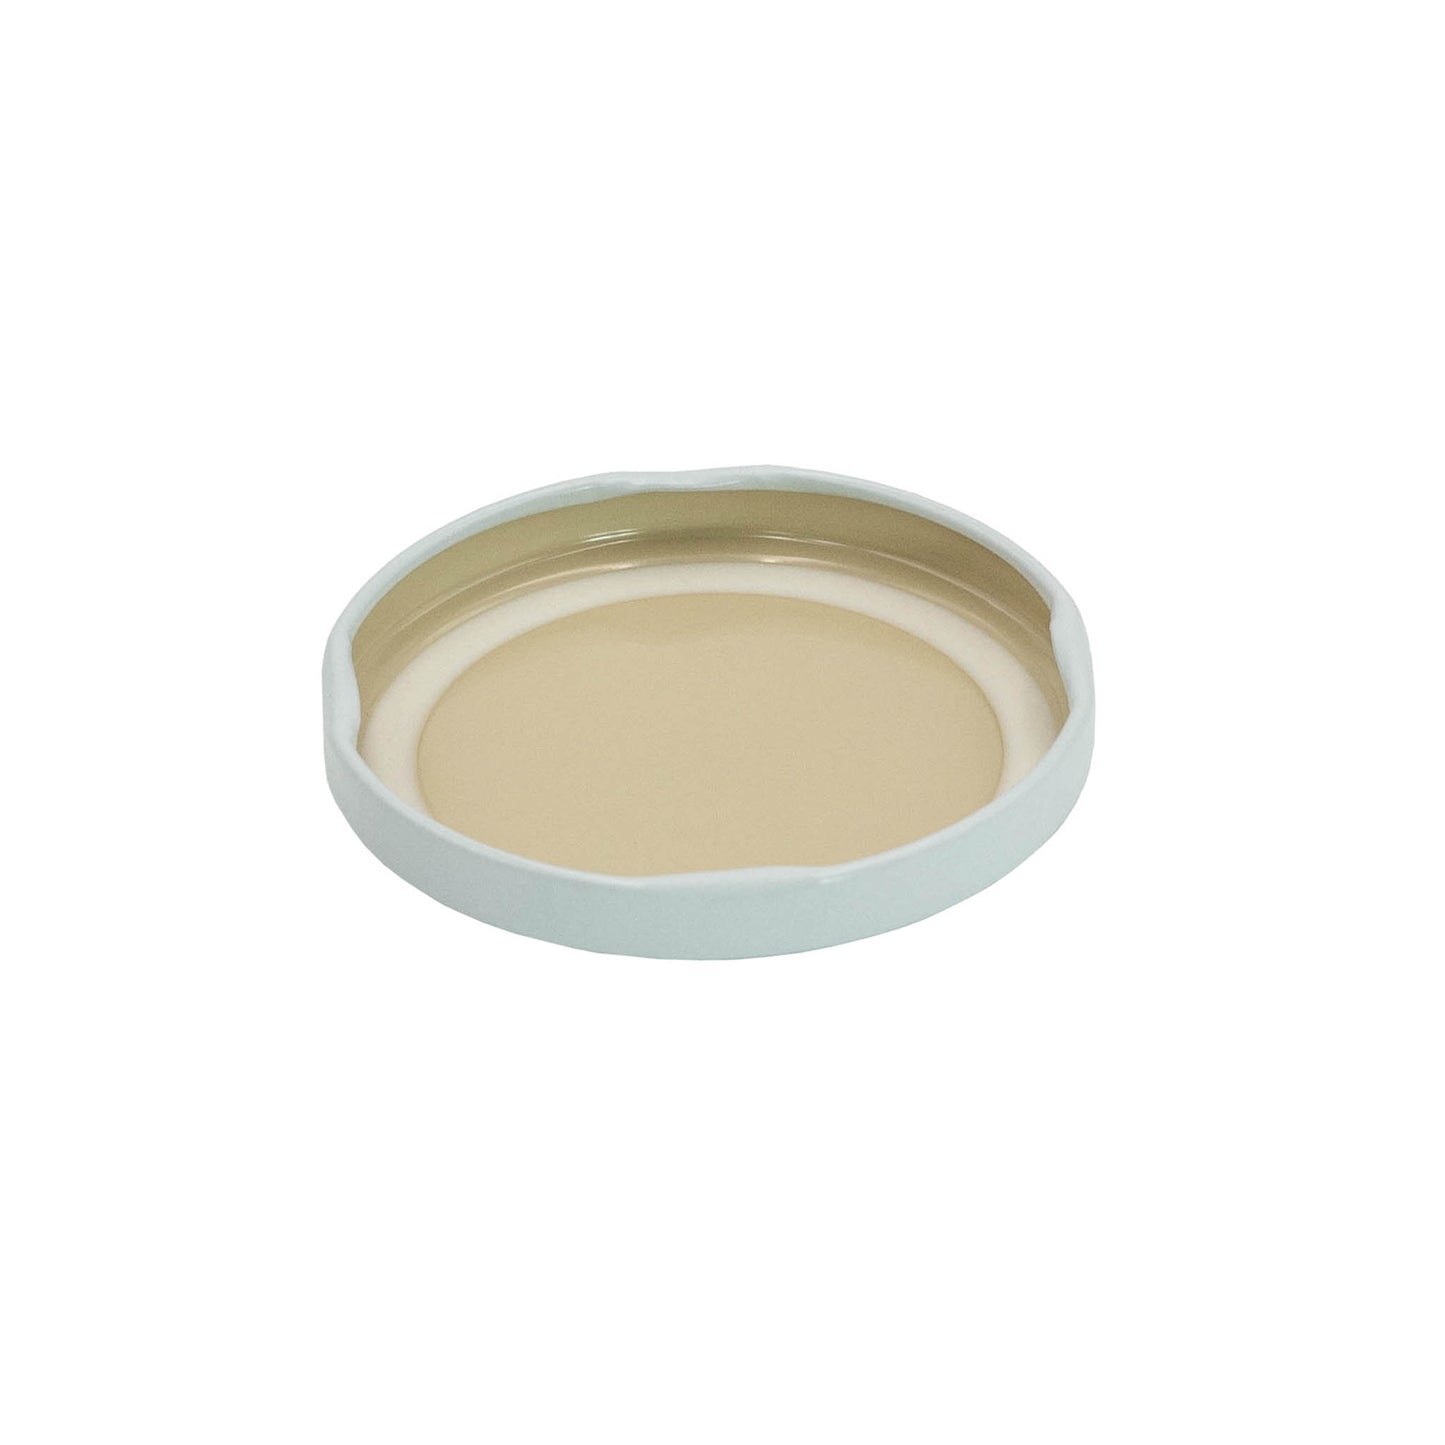 110mm white metal lid for glass jar